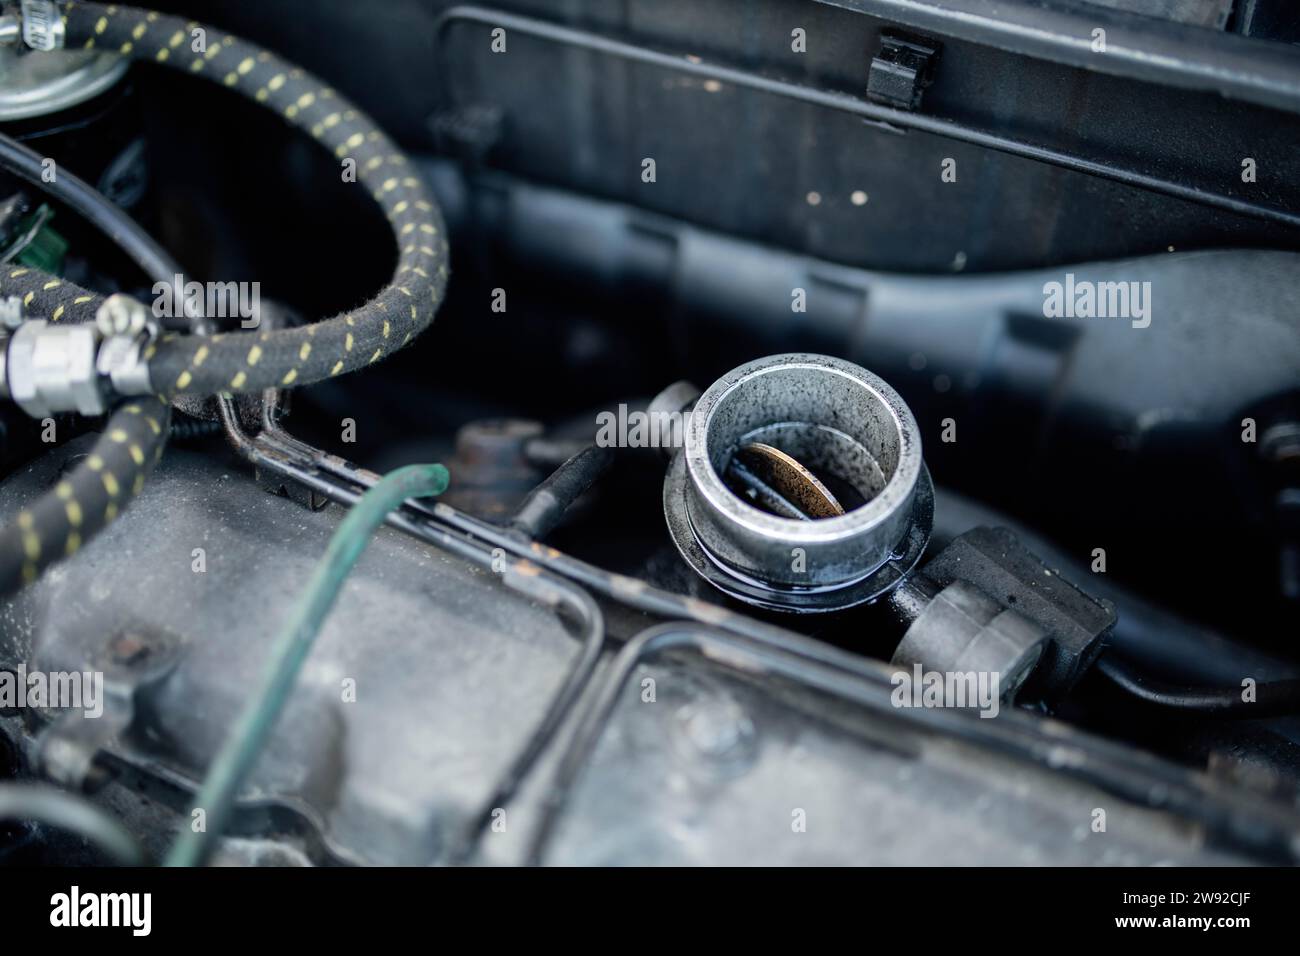 Dirty throttle valve of the car engine Stock Photo